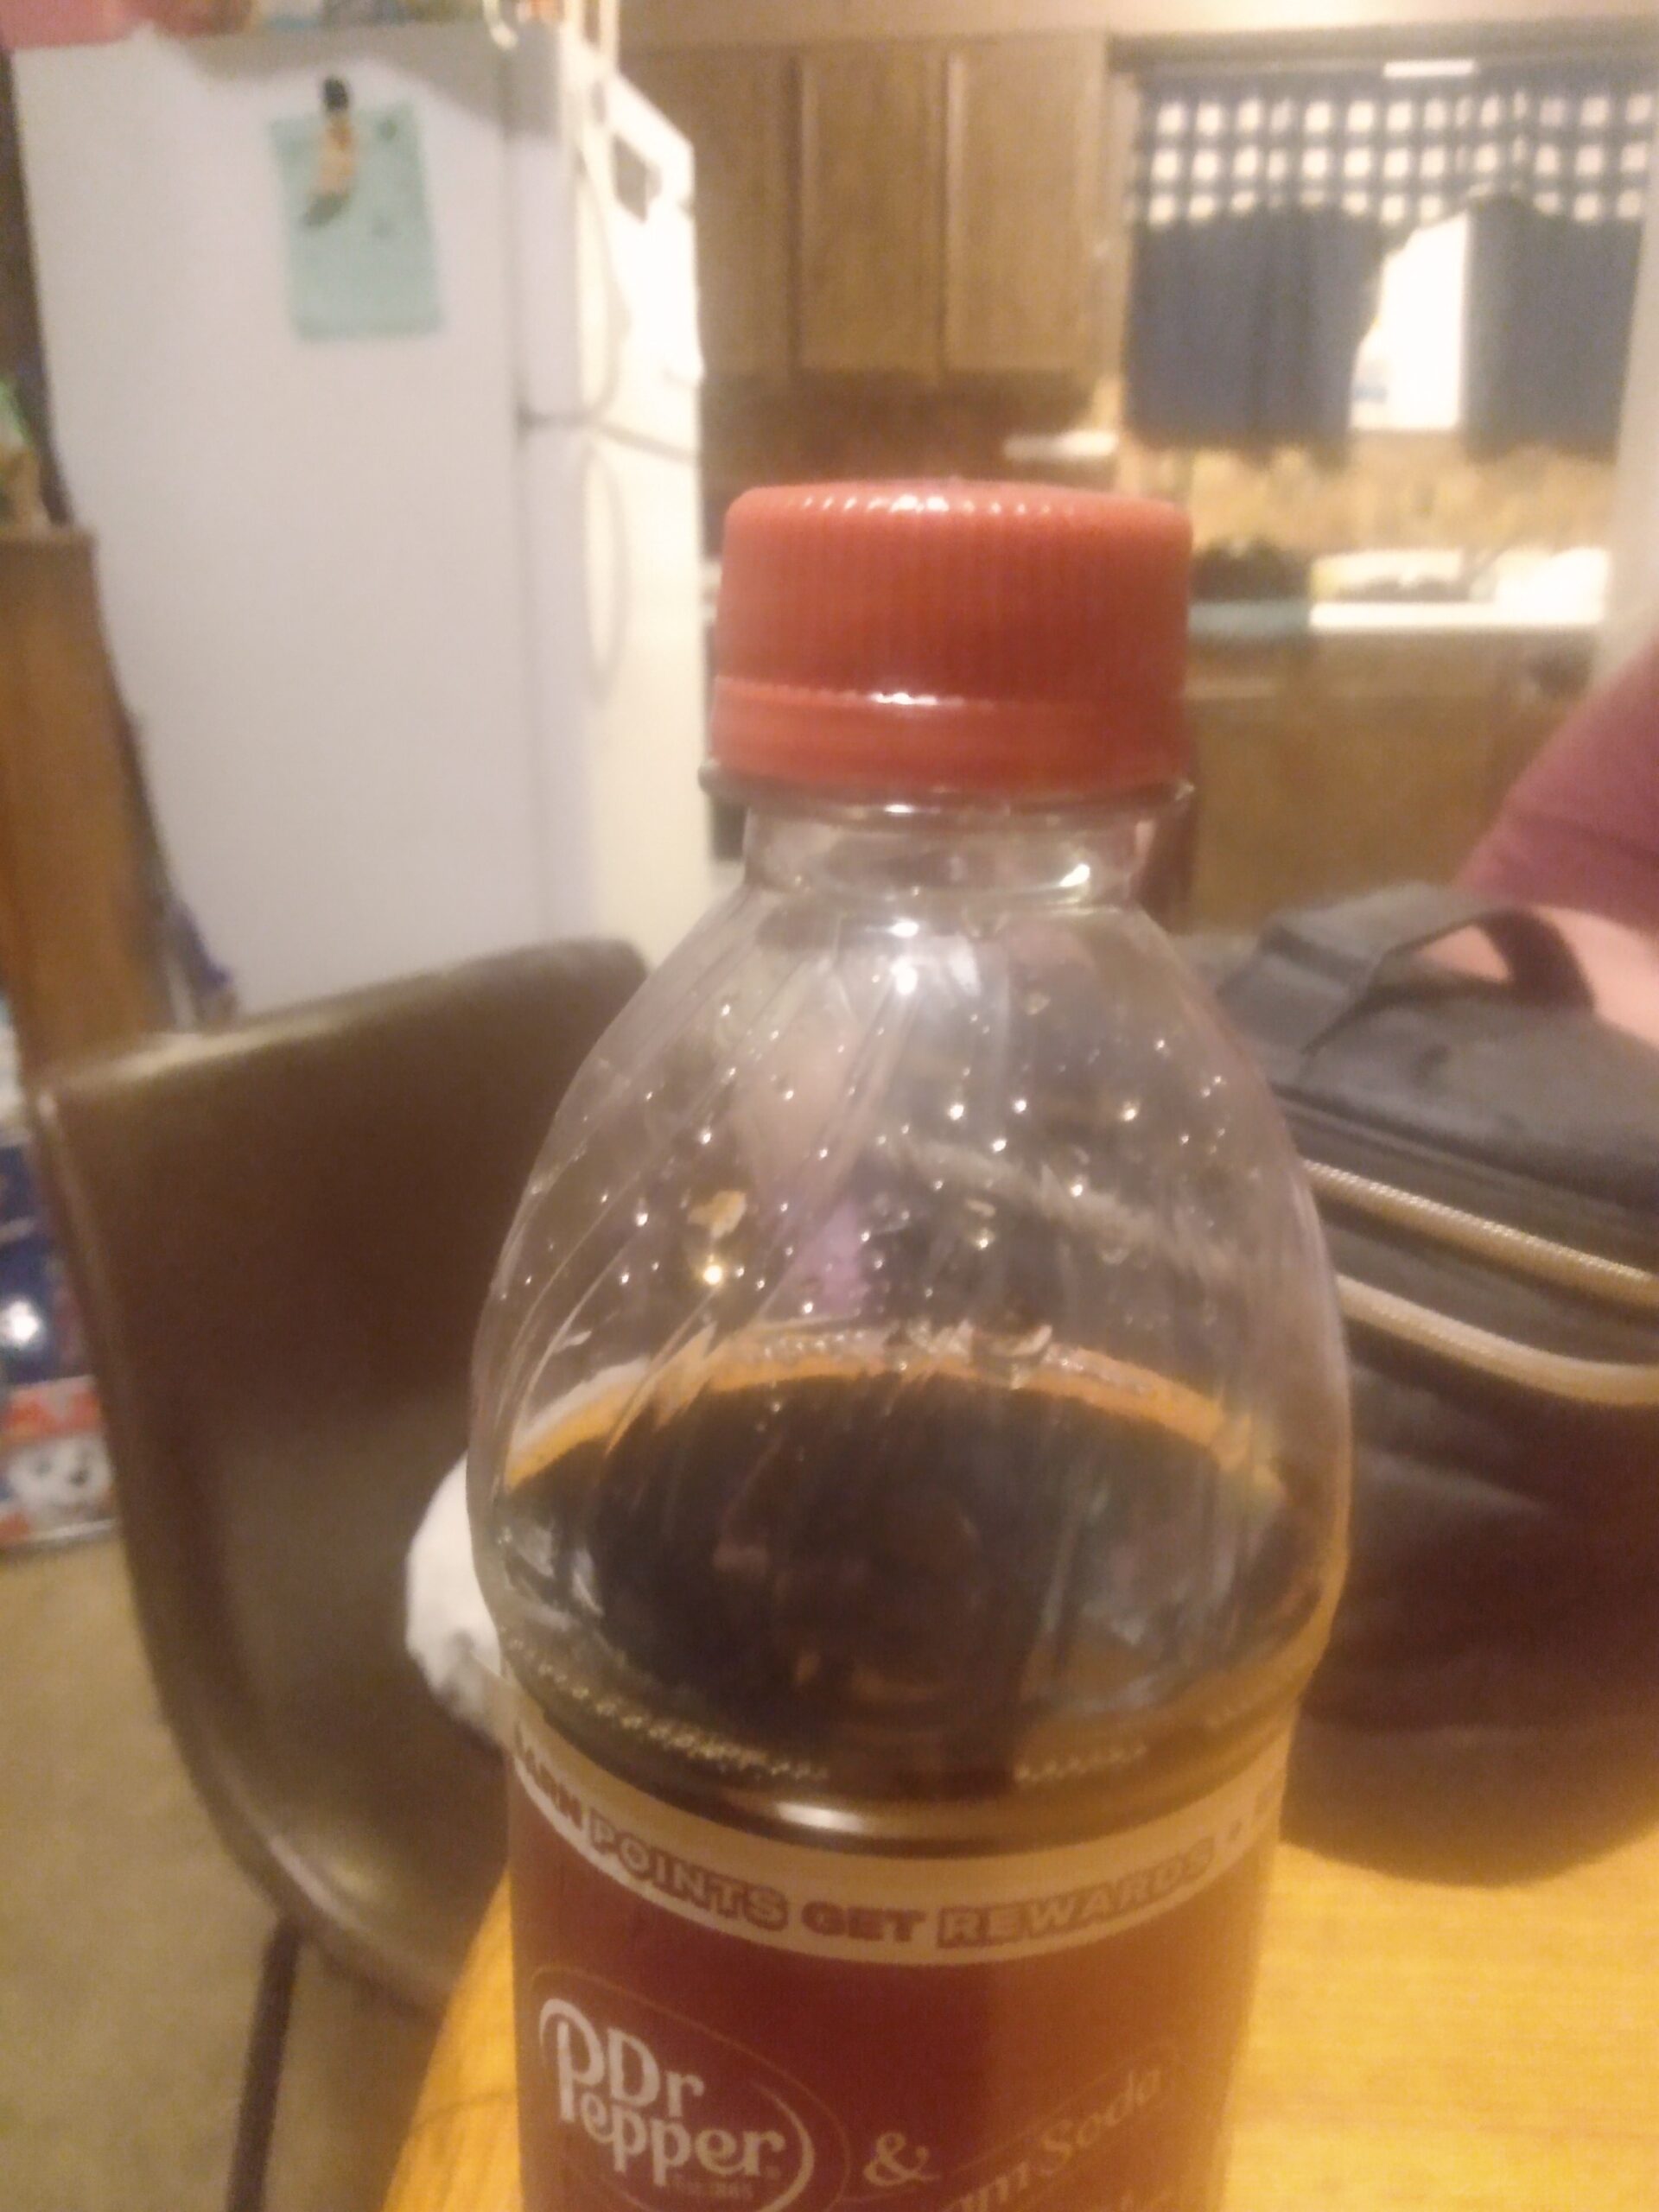 Unfilled bottle seal intact